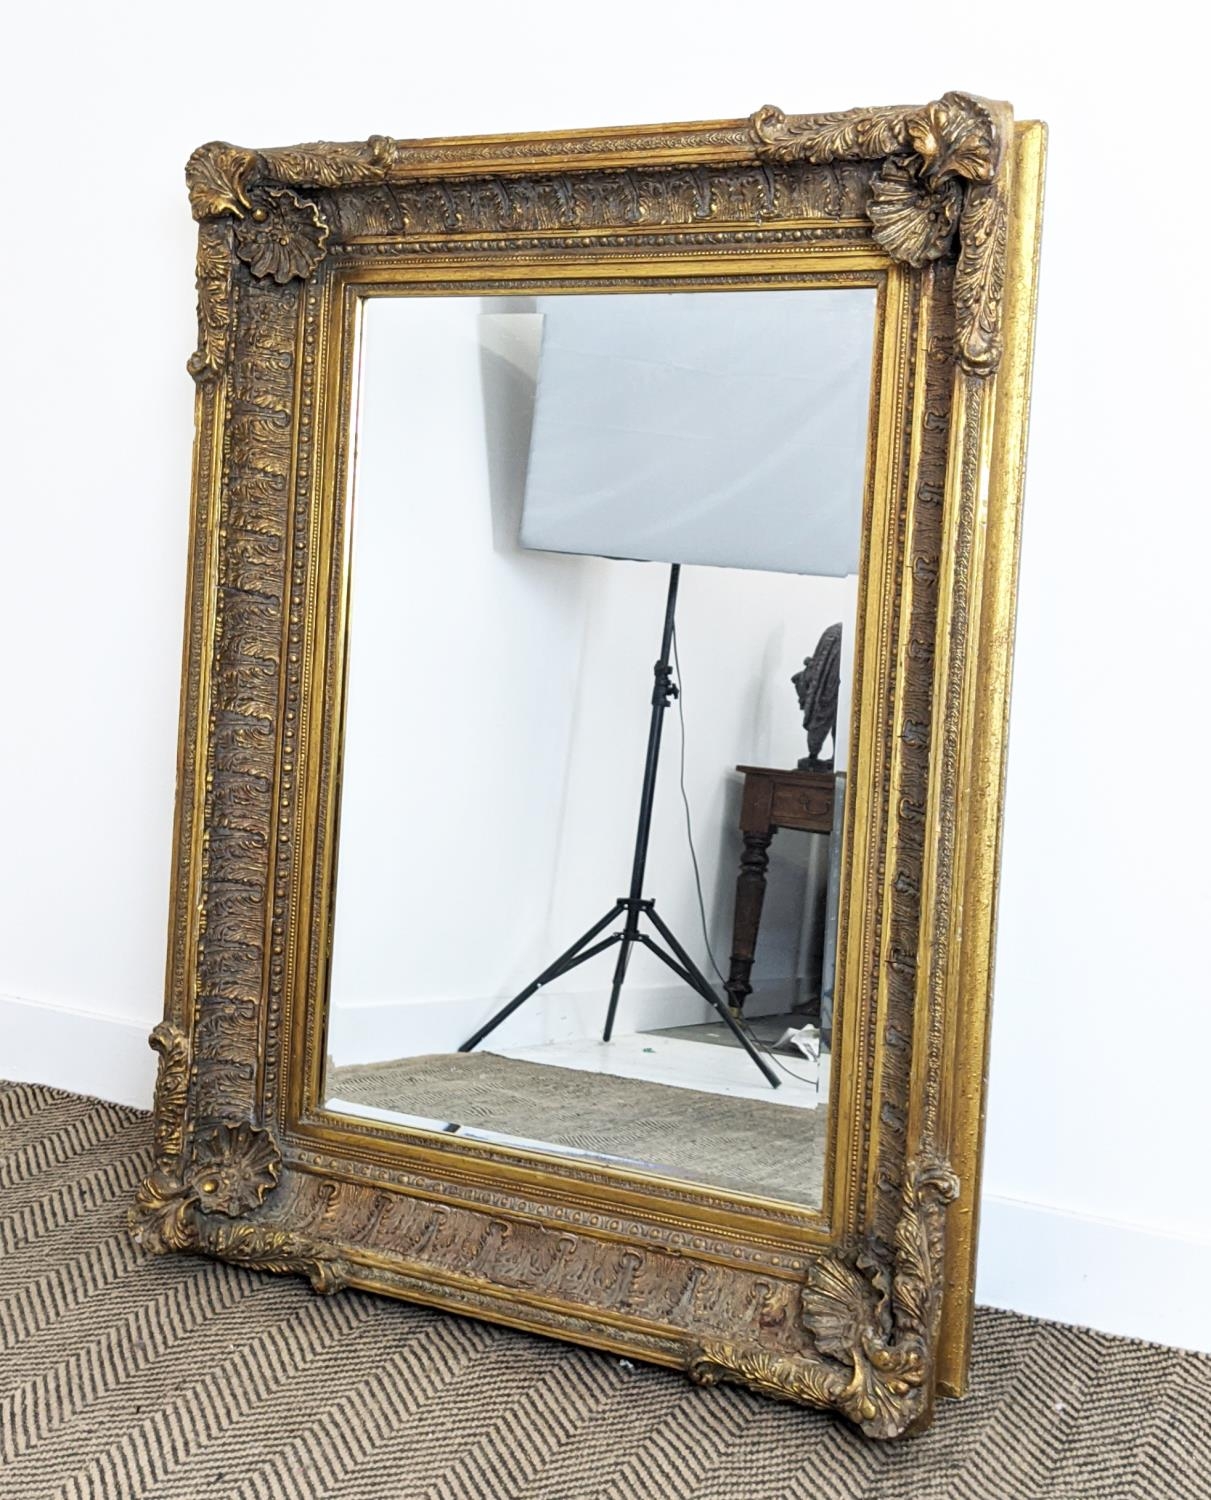 WALL MIRROR, 19th century style gilt framed with shell and leaf decoration, 121cm x 88cm.